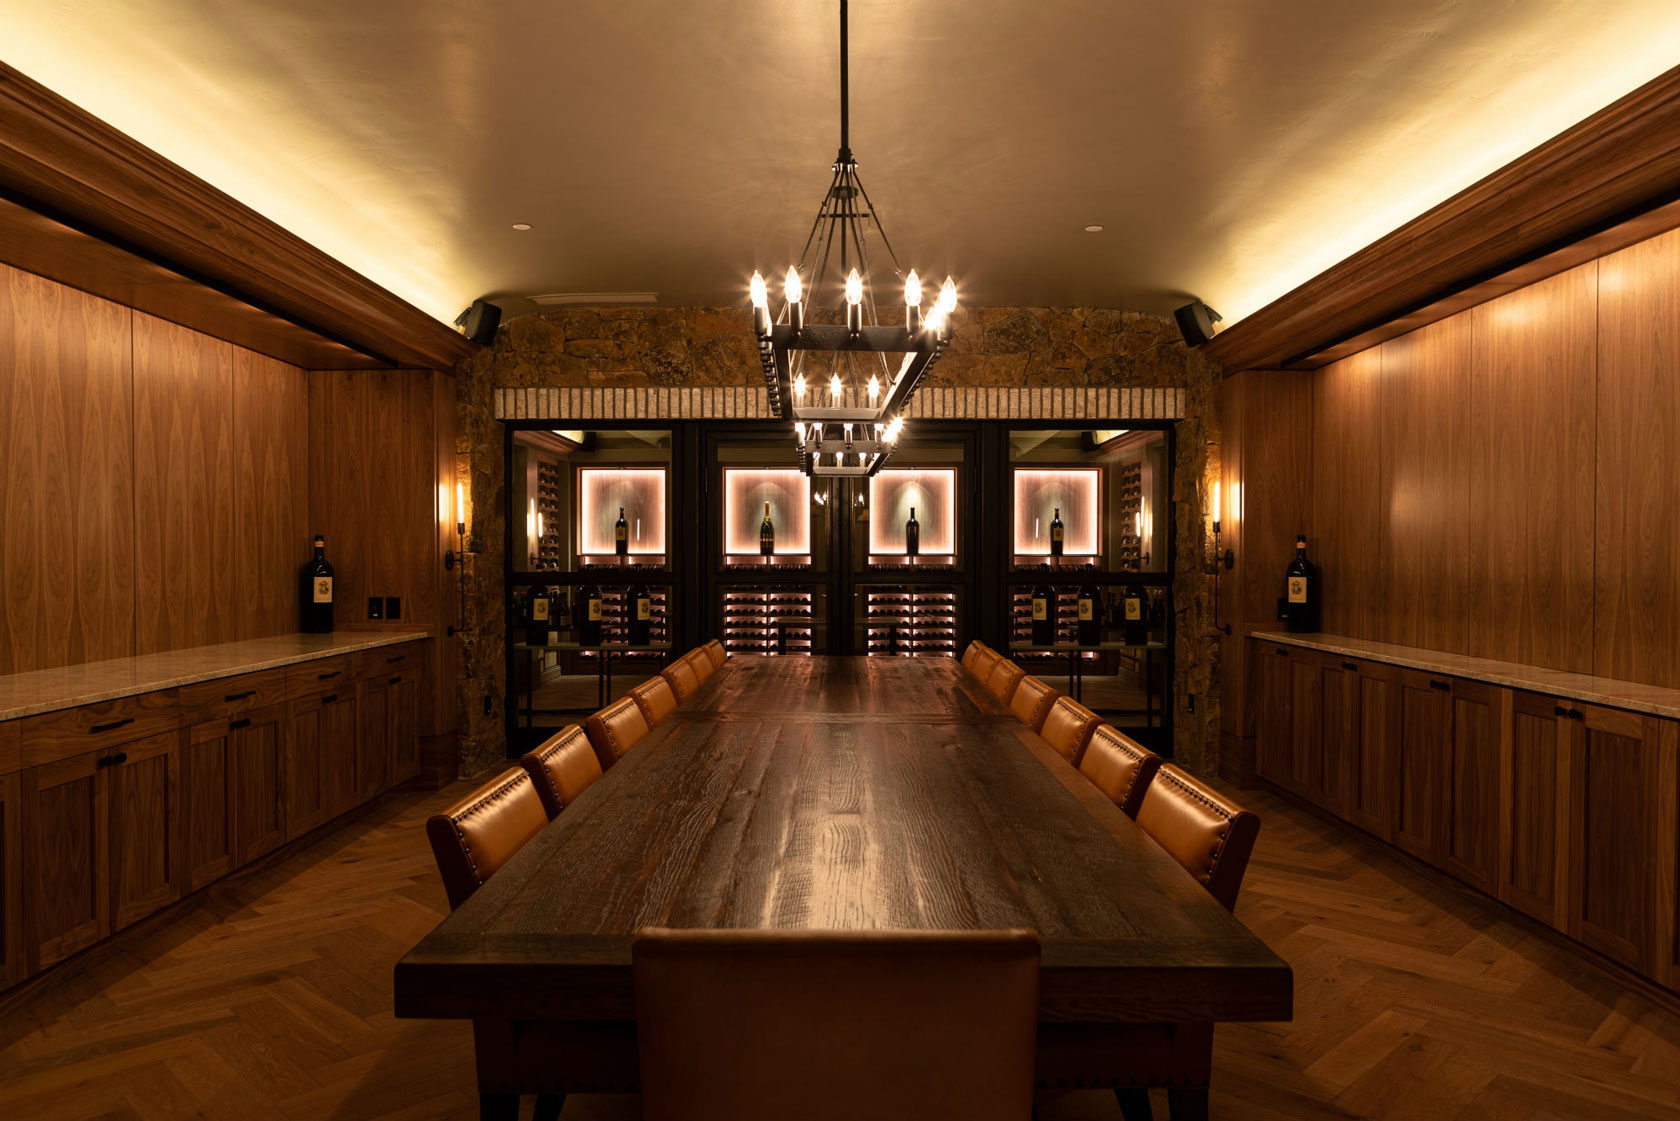 Tasting Room with View into Wine Cellar